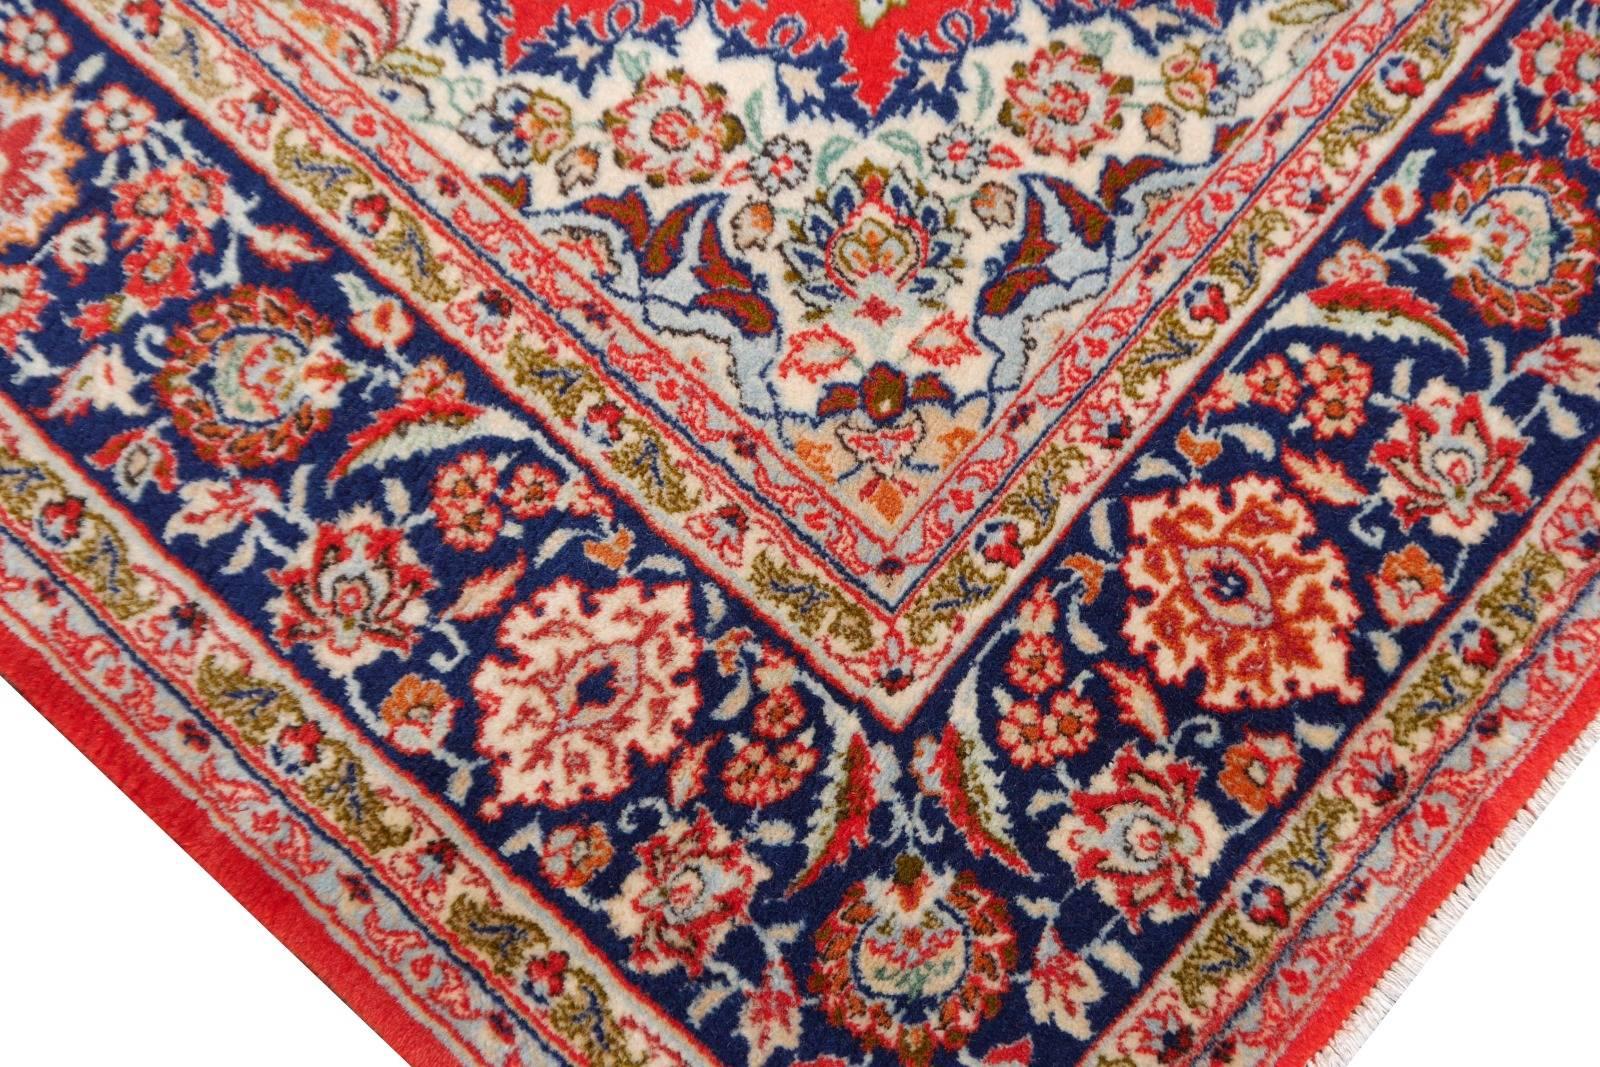 This fine hand-knotted Persian rug was made in the city of Isfahan / Esfahan in central Iran. Isfahan rugs are well-known for their fine and skilful detailed work. This rug was made in the 1970-1980 and is in very good condition. It has about 600